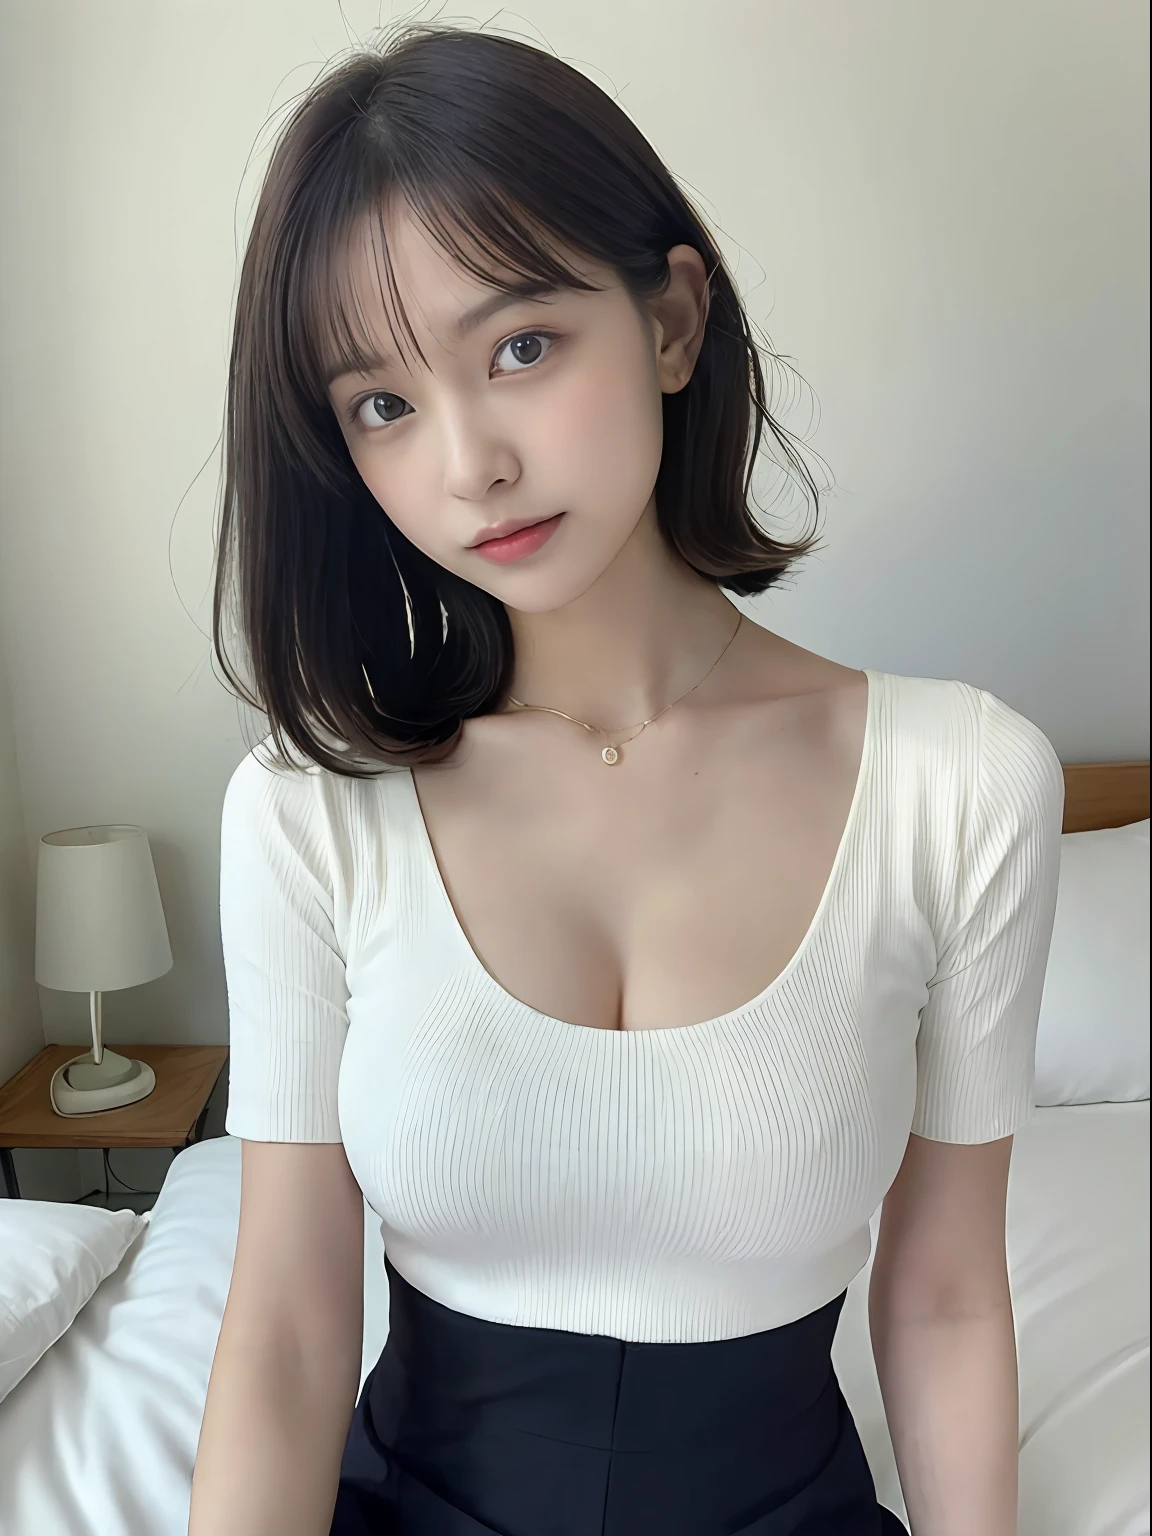 1 girl in, (Best quality, high resolution, masutepiece :1.3), A tall, enchanting and beautiful woman, Slender Abs,Short black hair，Scattered wavy, no-good, nedium breasts, Wearing a pendant, Short white crop top sleeves. bag over the waist,Blue hip skirt, (Bedroom in the background), Details exquisitely rendered in the face and skin texture, Detailed eyes, double eyelid、